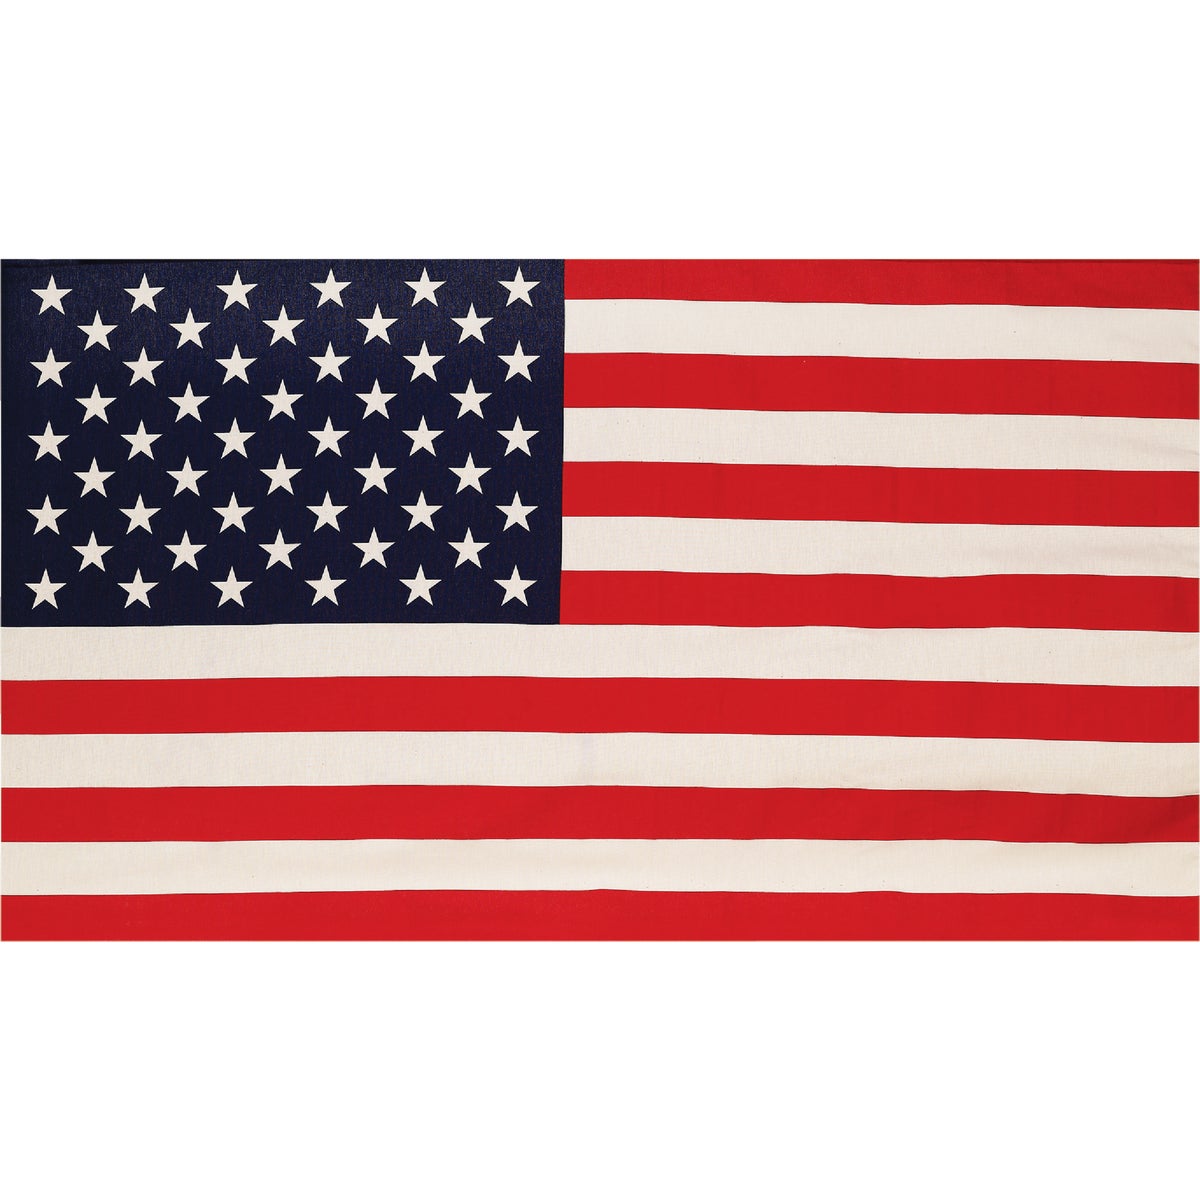 Item 803964, American polycotton flag. Durable and long lasting.